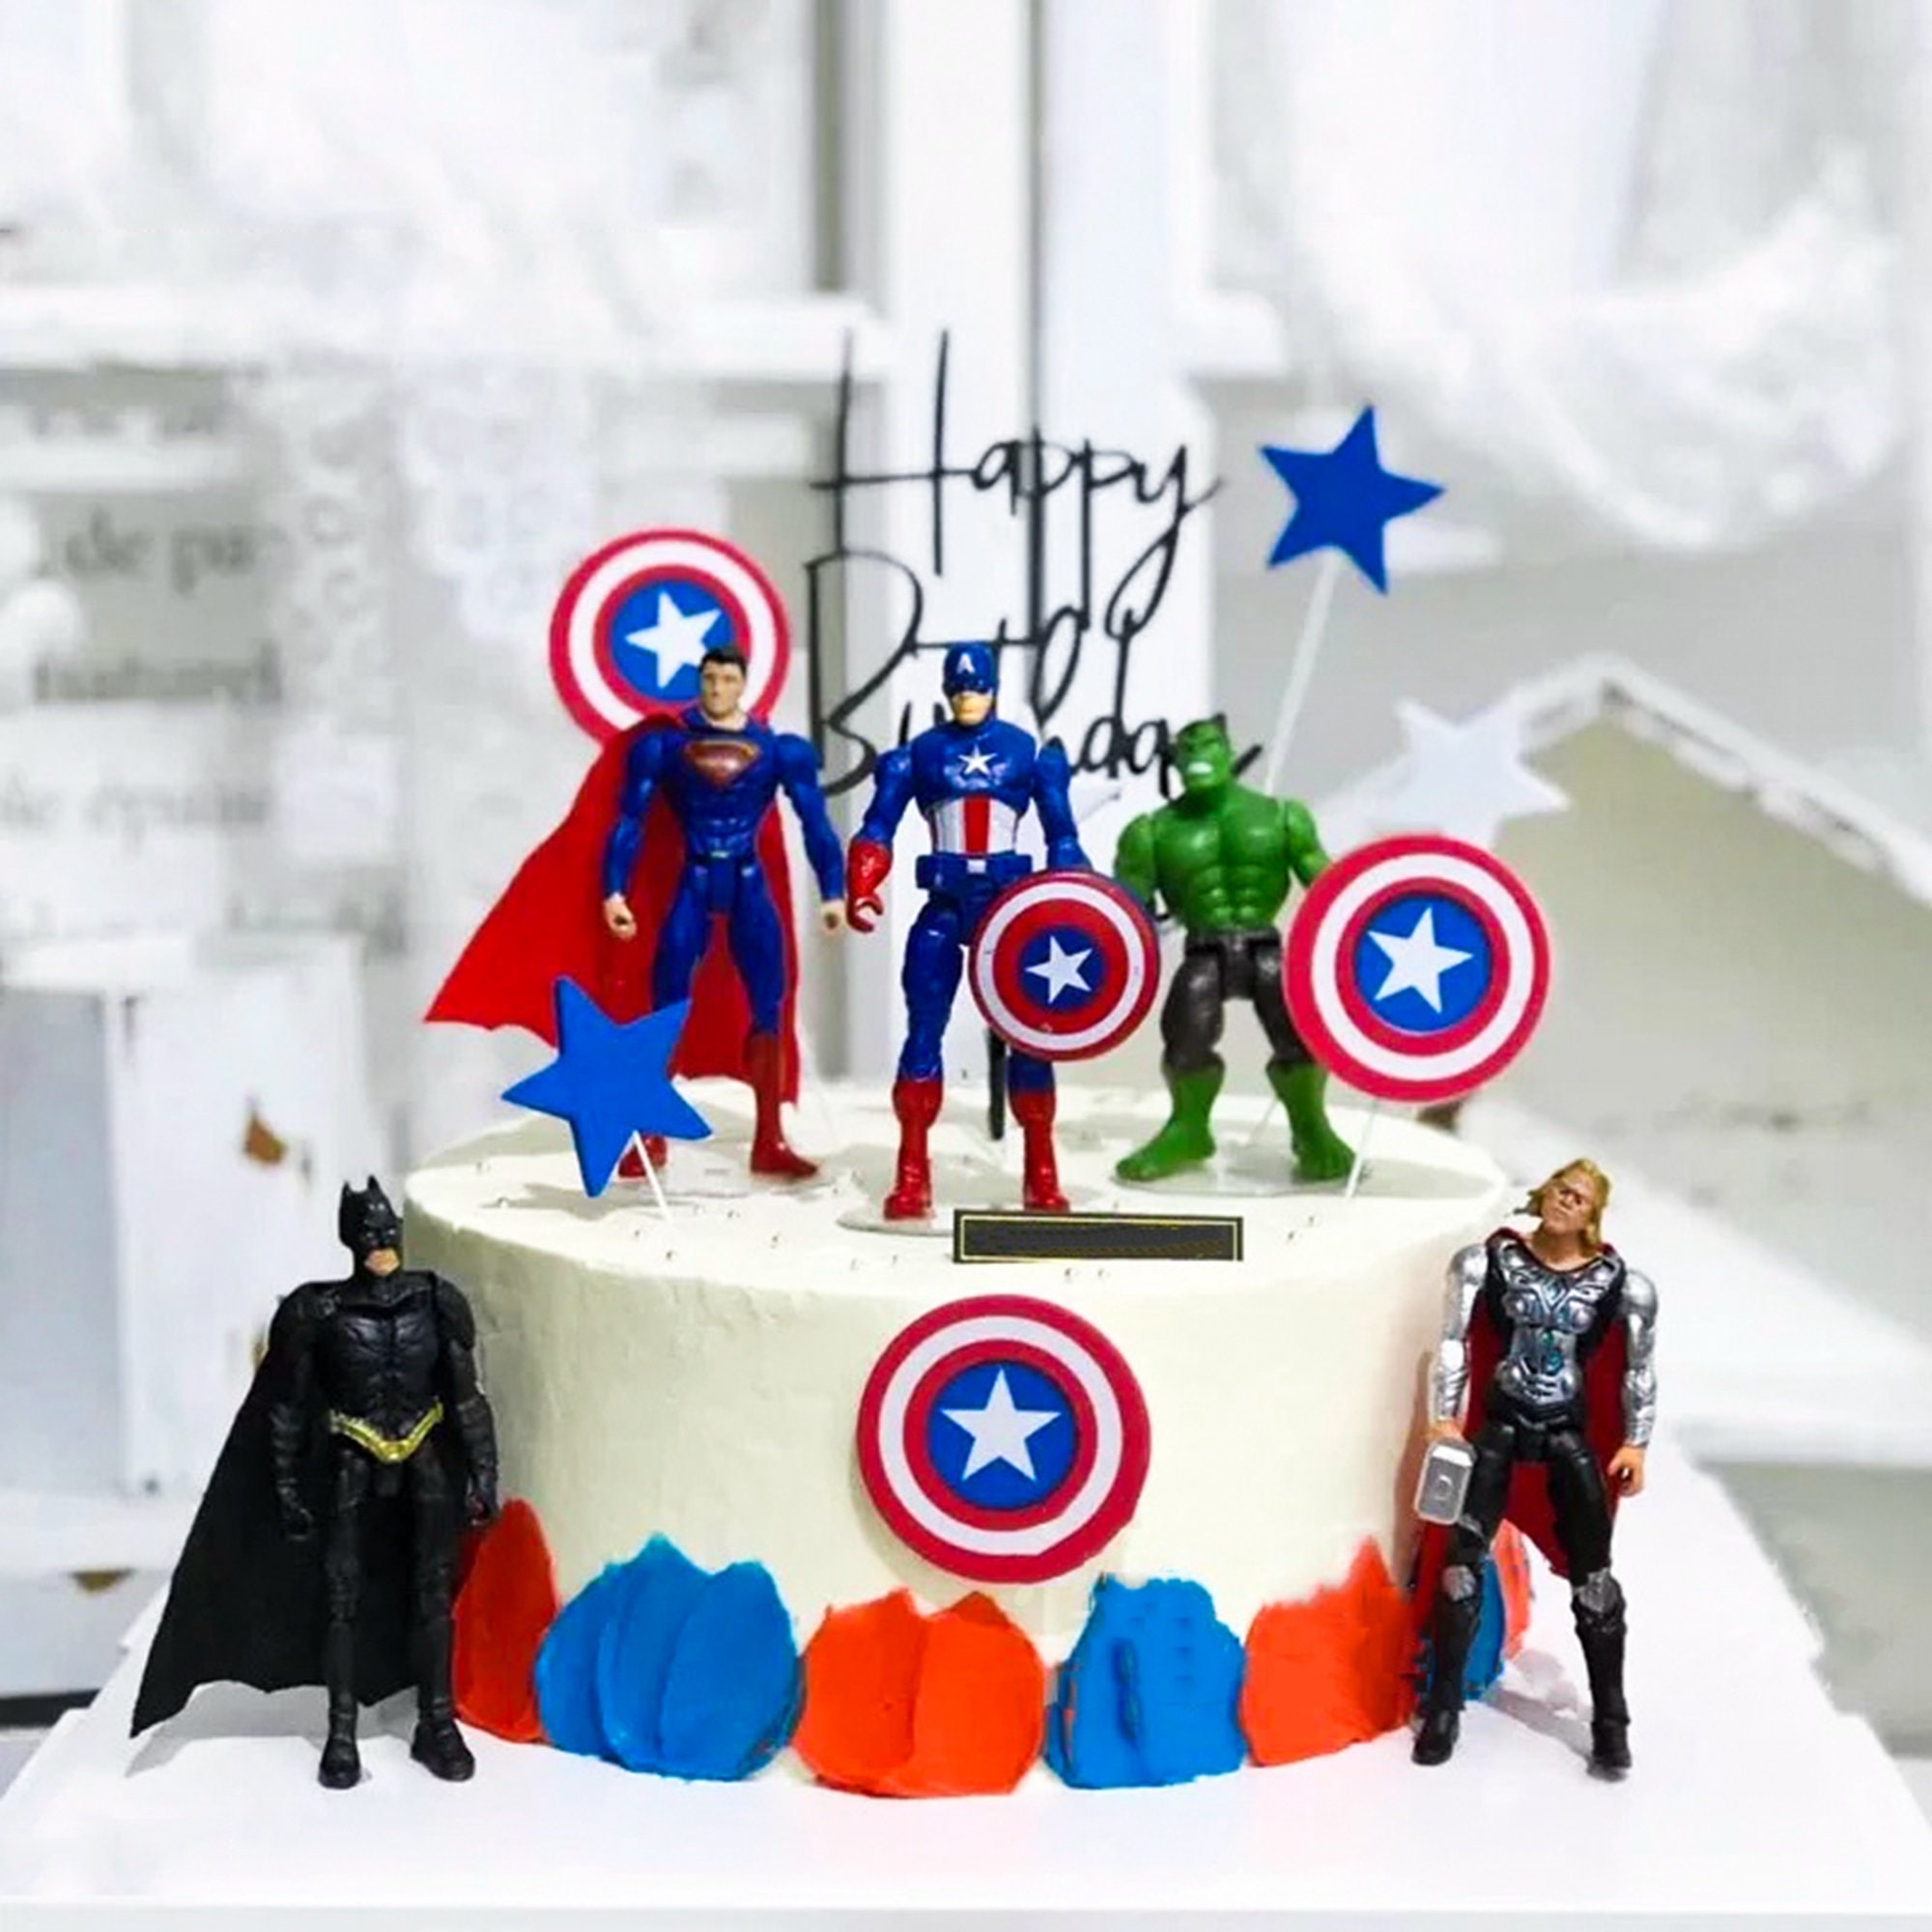 Avengers Handmade Mini Figures Superheroes Crocheted Infinitive War Endgame Crocheted toy Angerger Endgame toy set display dolls Baby gifts toddler toys tell story toys 